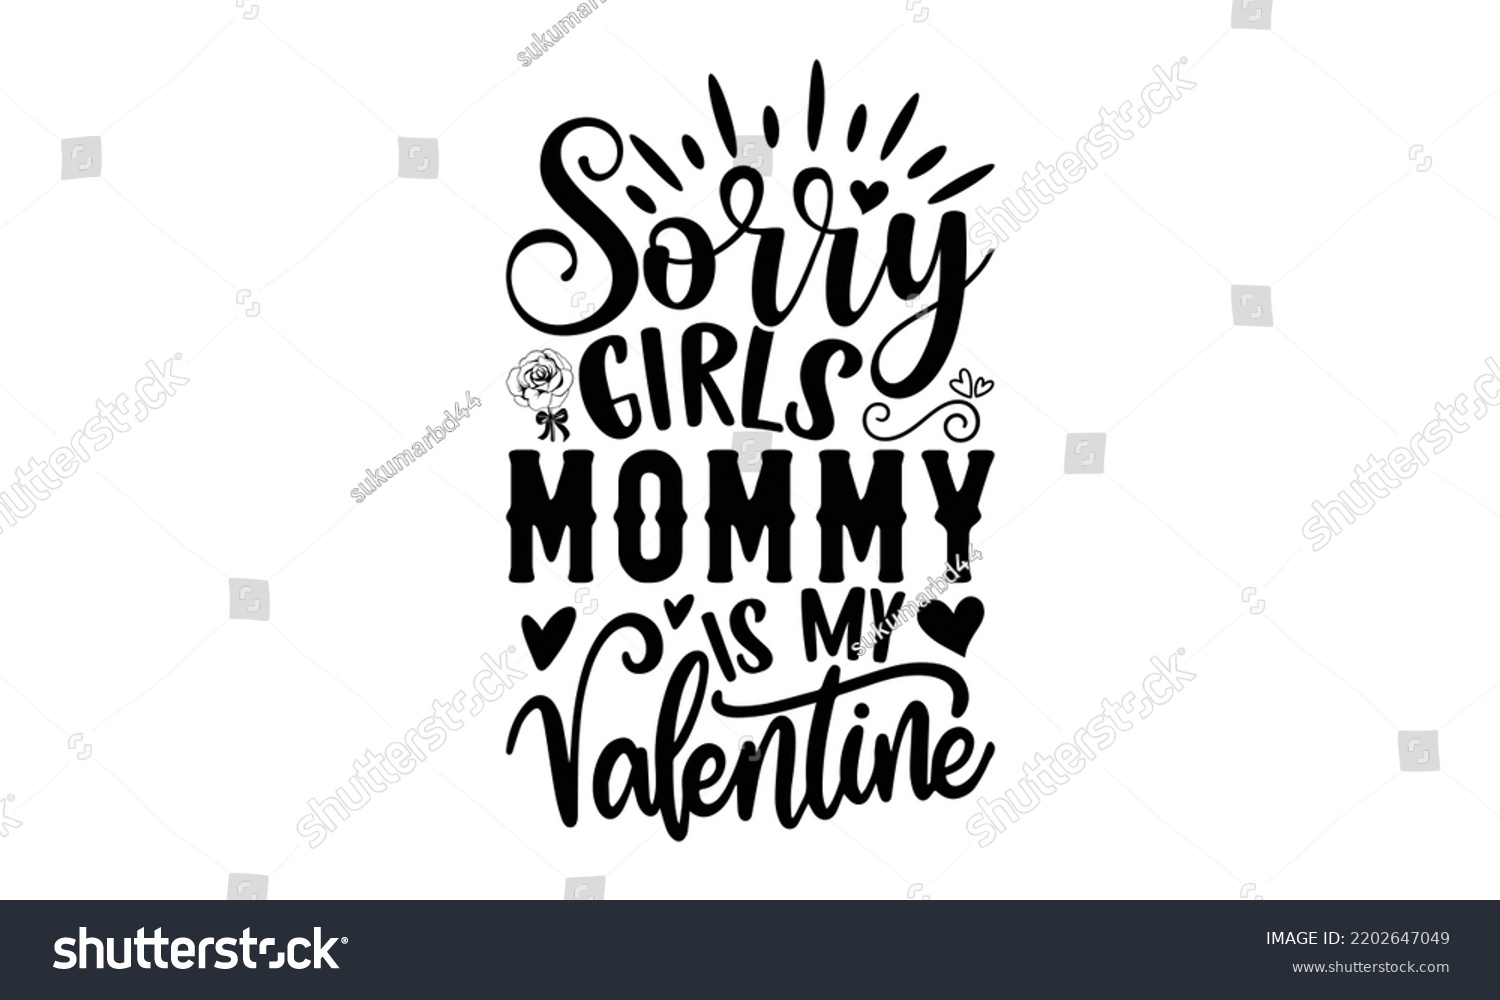 SVG of Sorry Girls Mommy Is My Valentine - Valentine's Day 2023 quotes svg design, Hand drawn vintage hand lettering, This illustration can be used as a print on t-shirts and bags, stationary or as a poster. svg